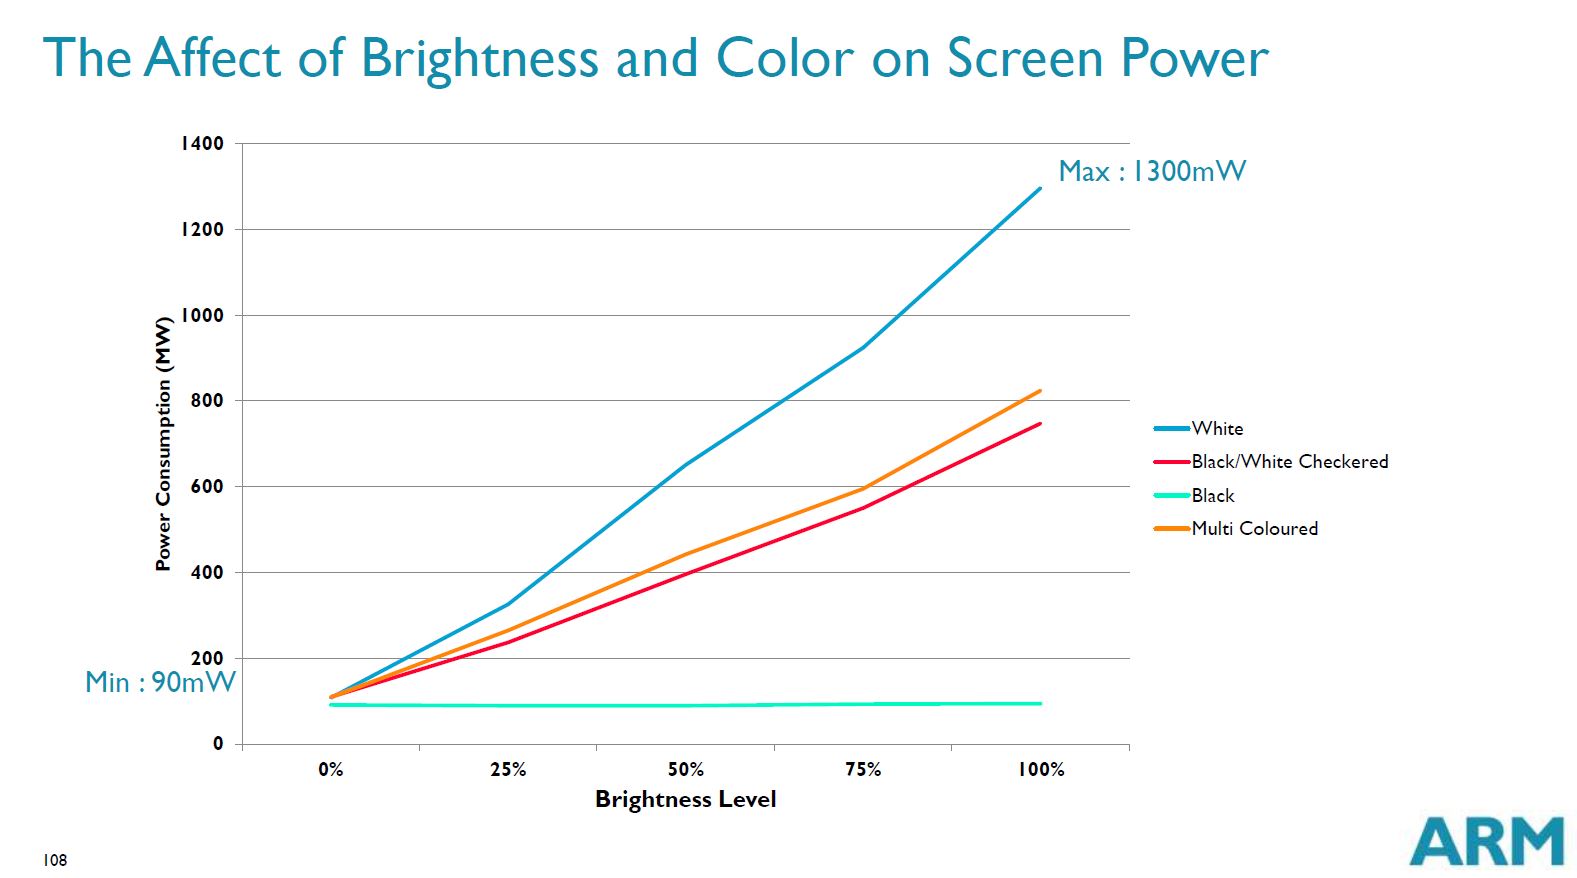 Brightness Color and Power Consumption